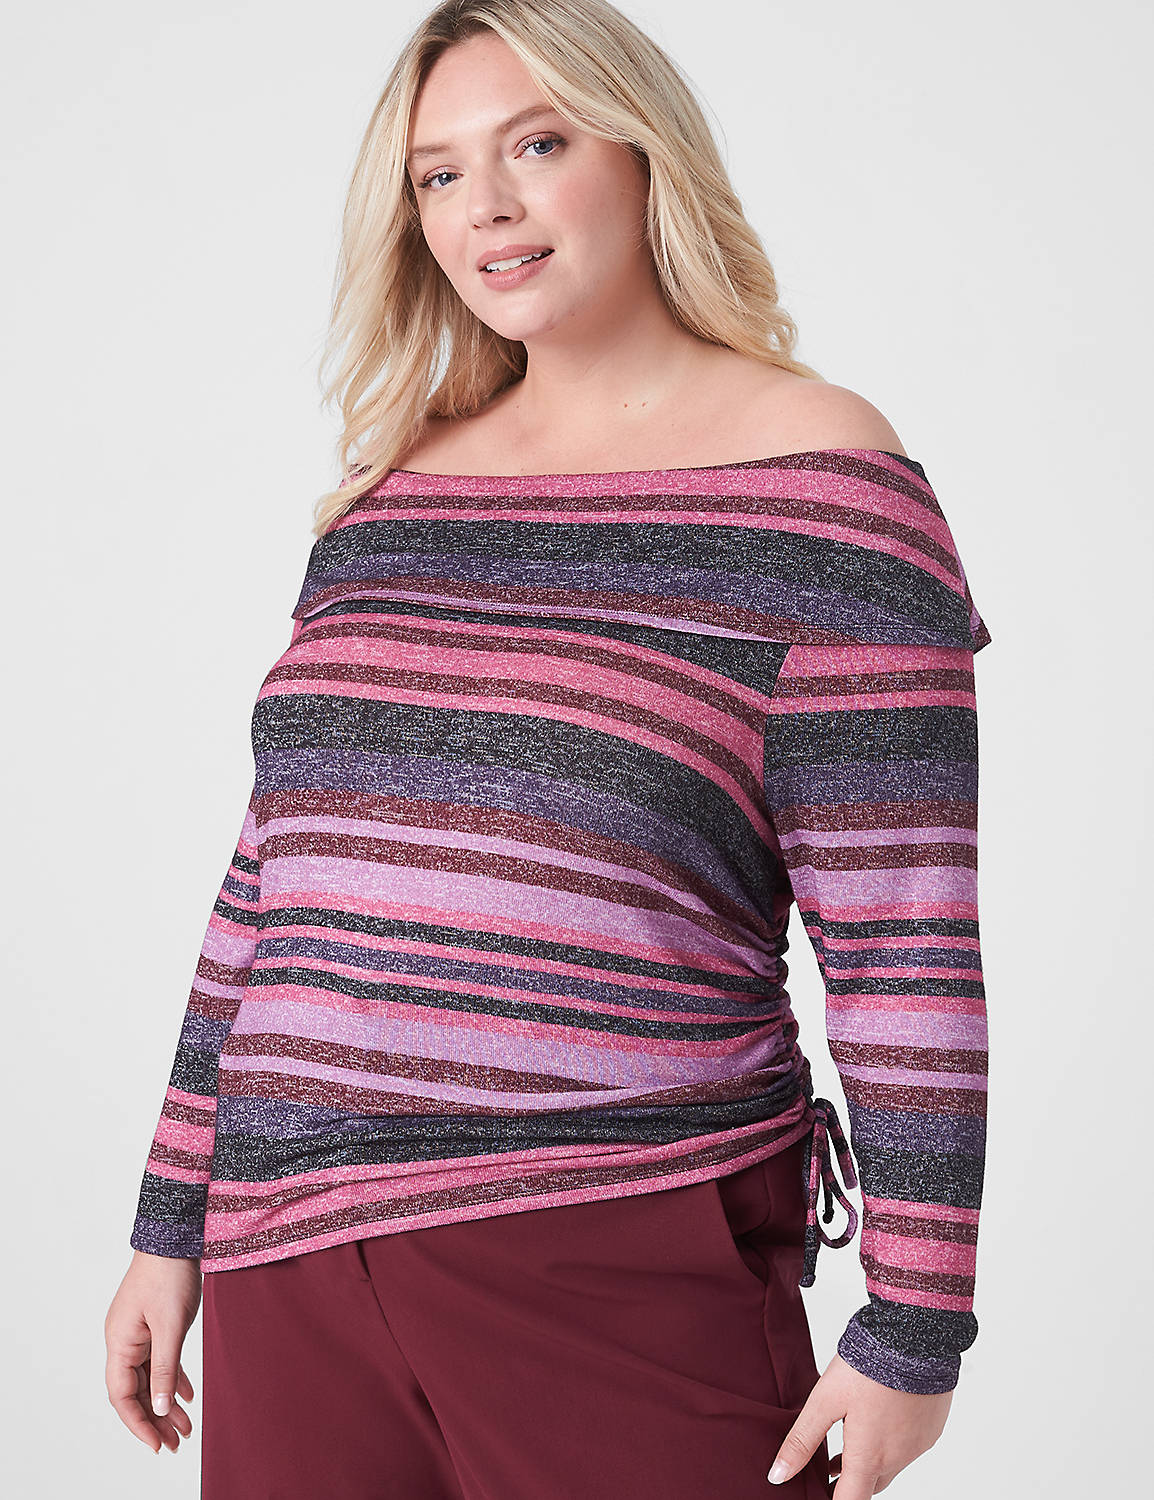 lane bryant classic long-sleeve off-the-shoulder cowlneck knit top 18/20 anika stripe